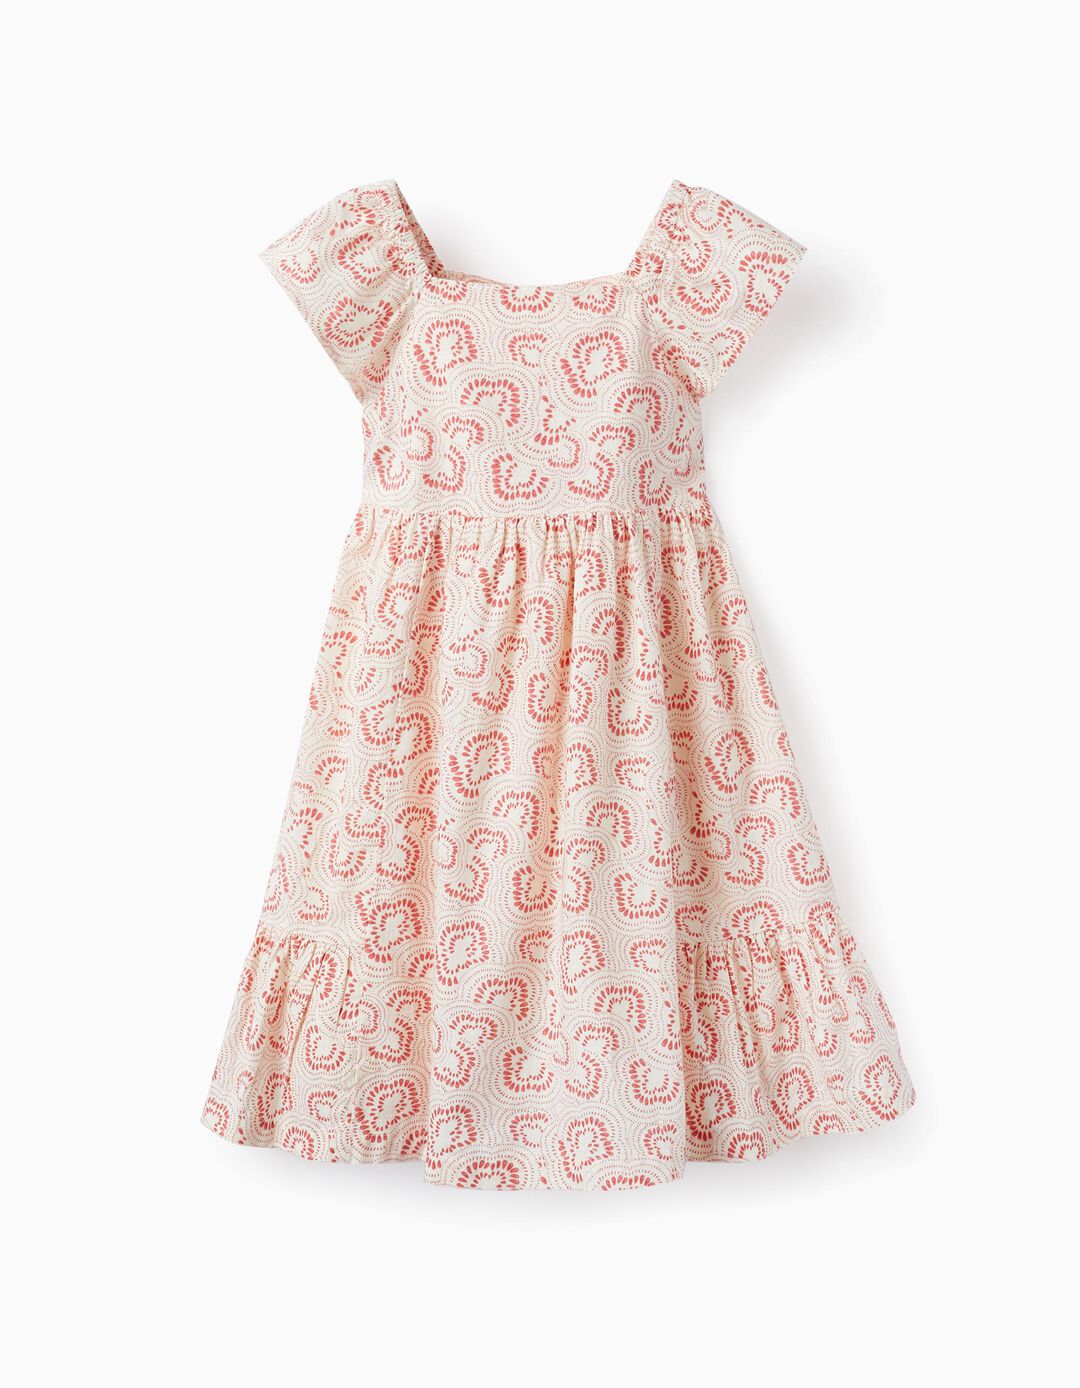 Floral Cotton Dress with Ruffles for Girls, Pink/White